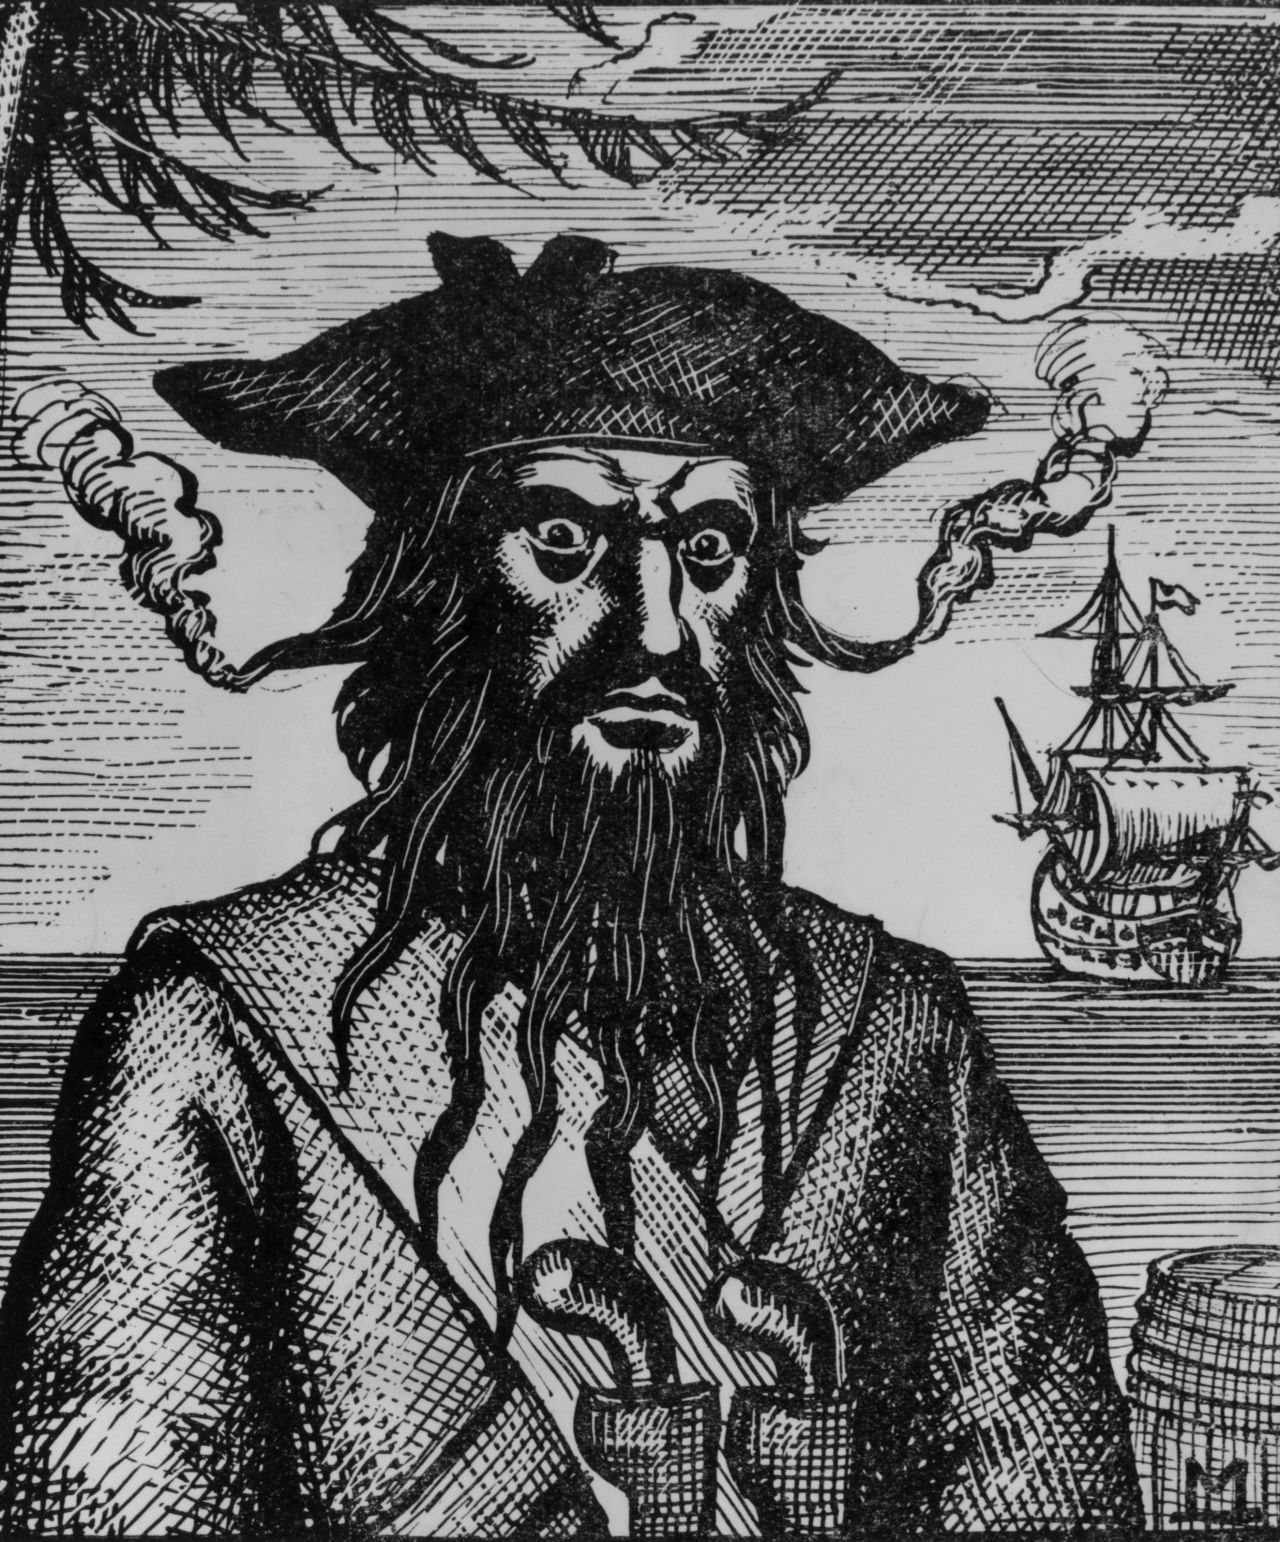 There are no actual photos of Blackbeard, but there IS this scary artist rendition. And those eyes say, "Give me just ... one ... tater tot."